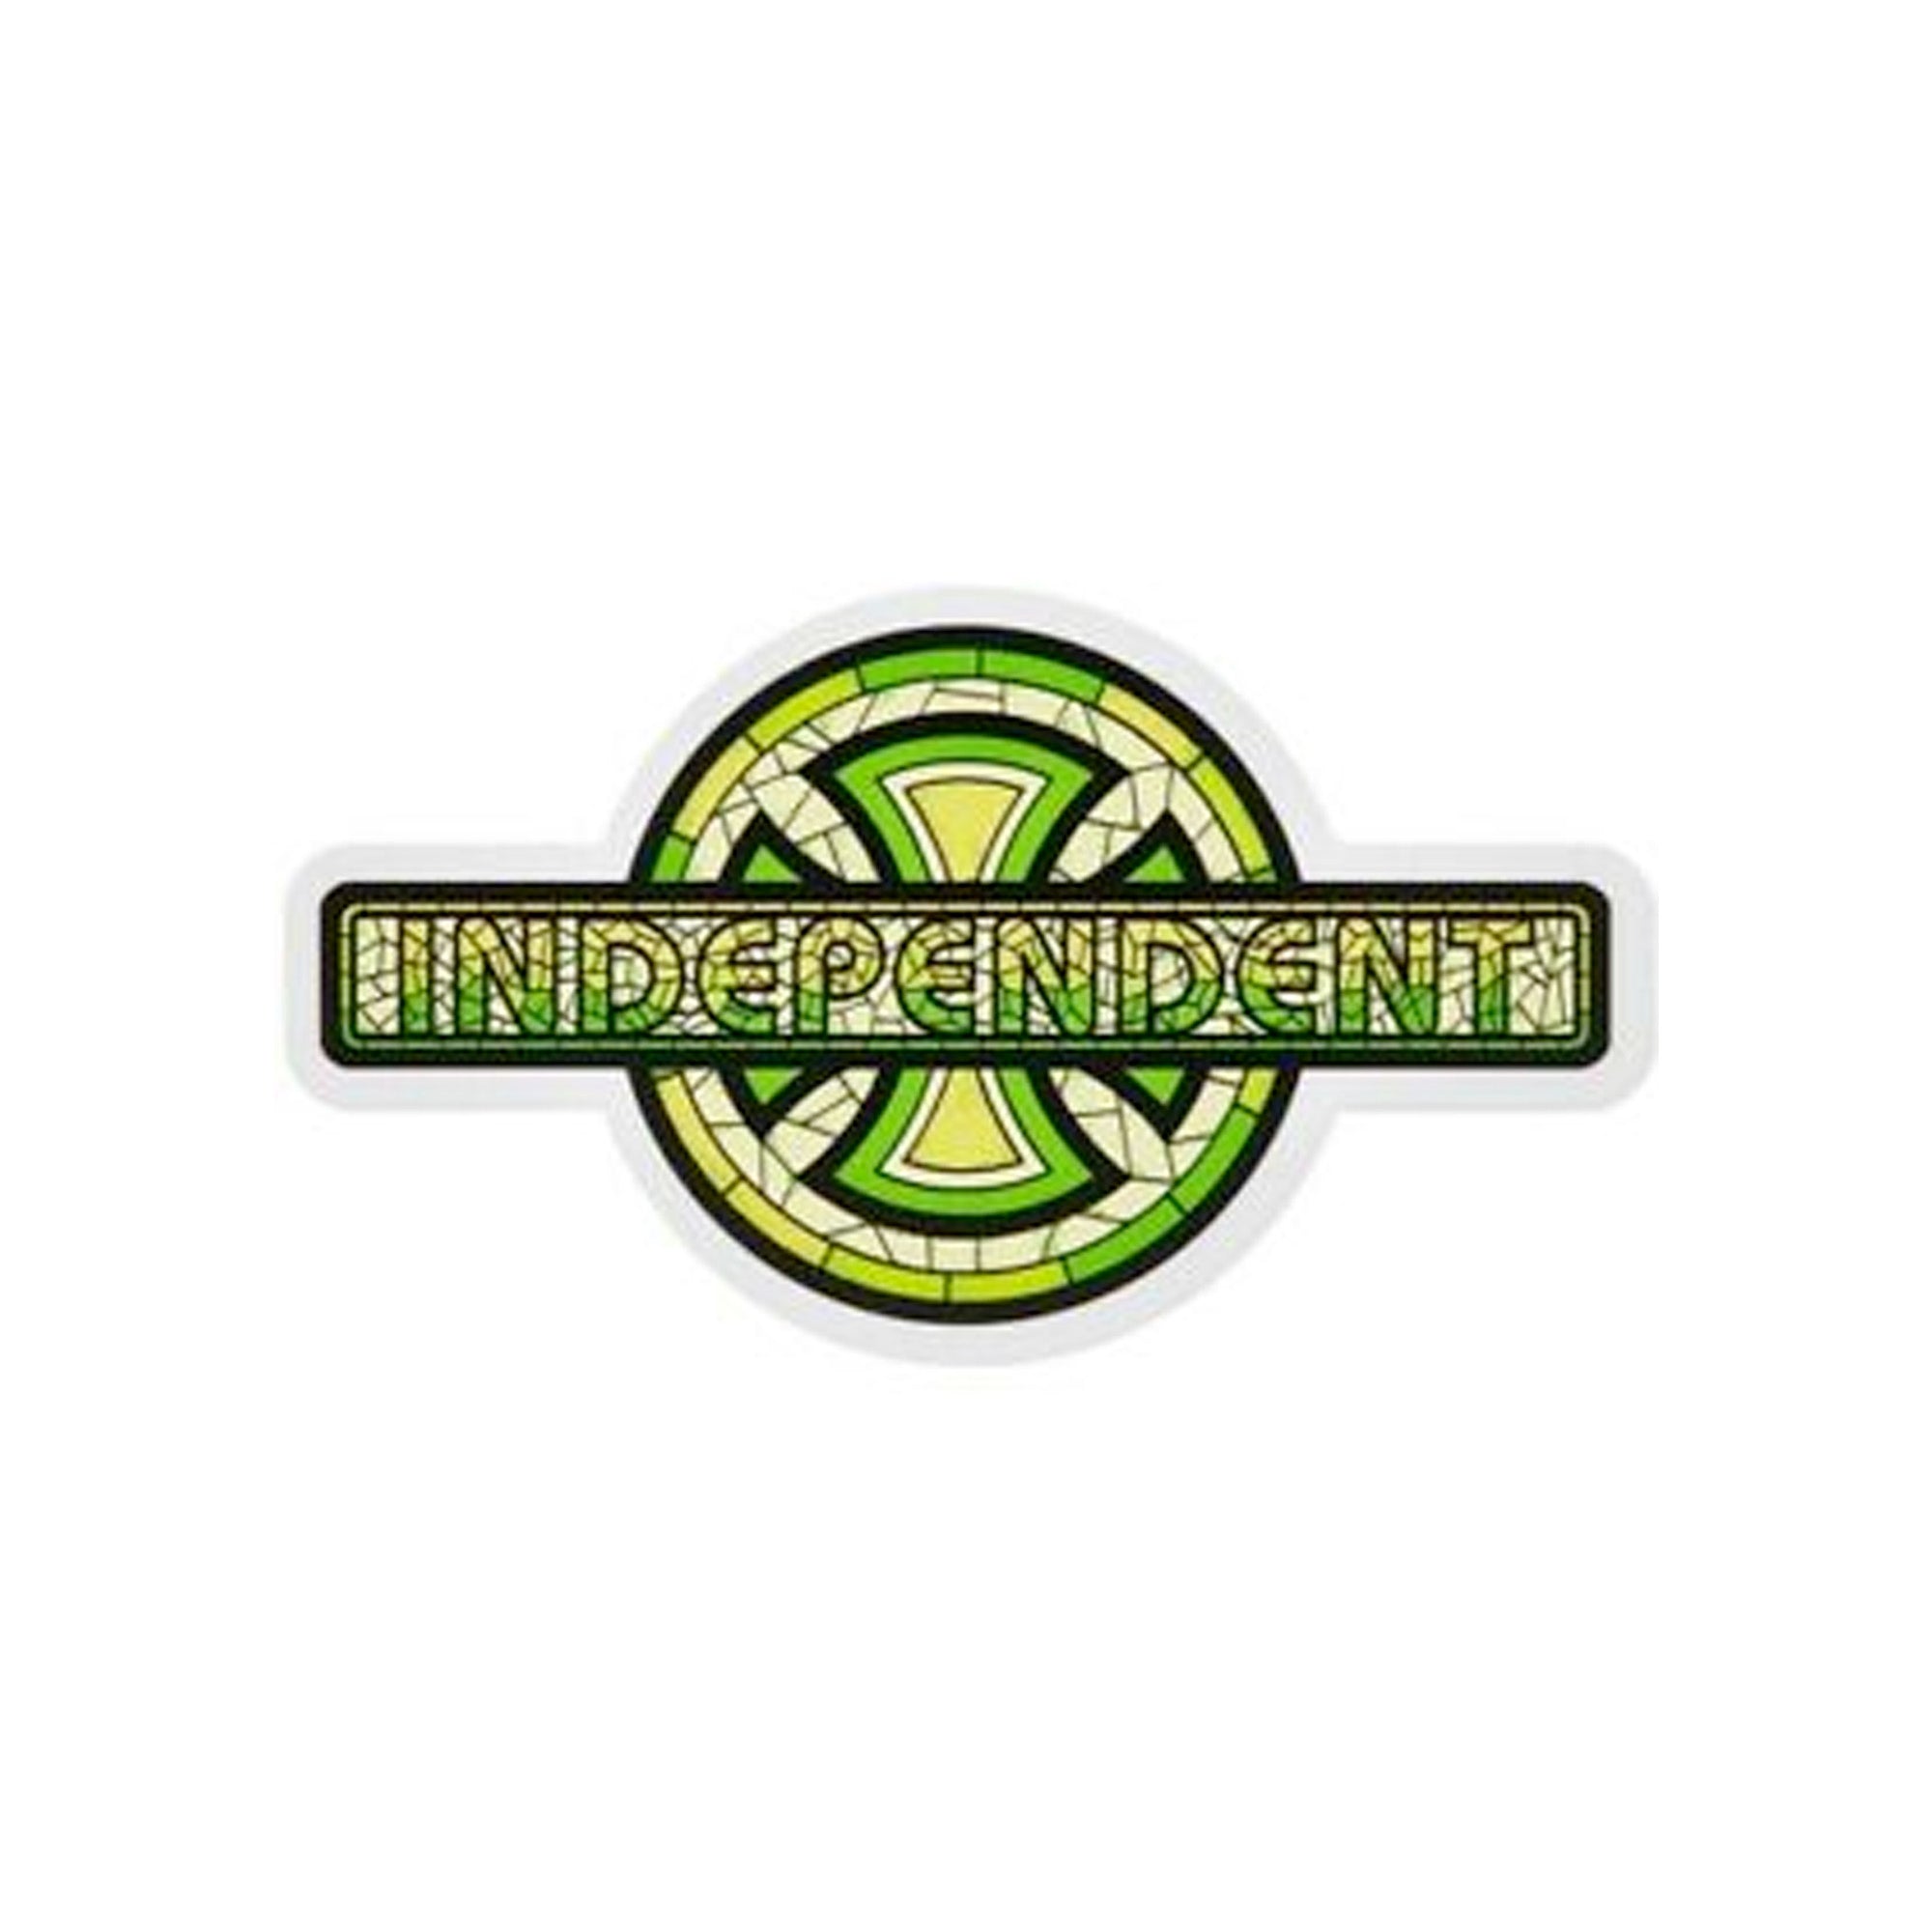 Independent Stained Glass Decal - Green